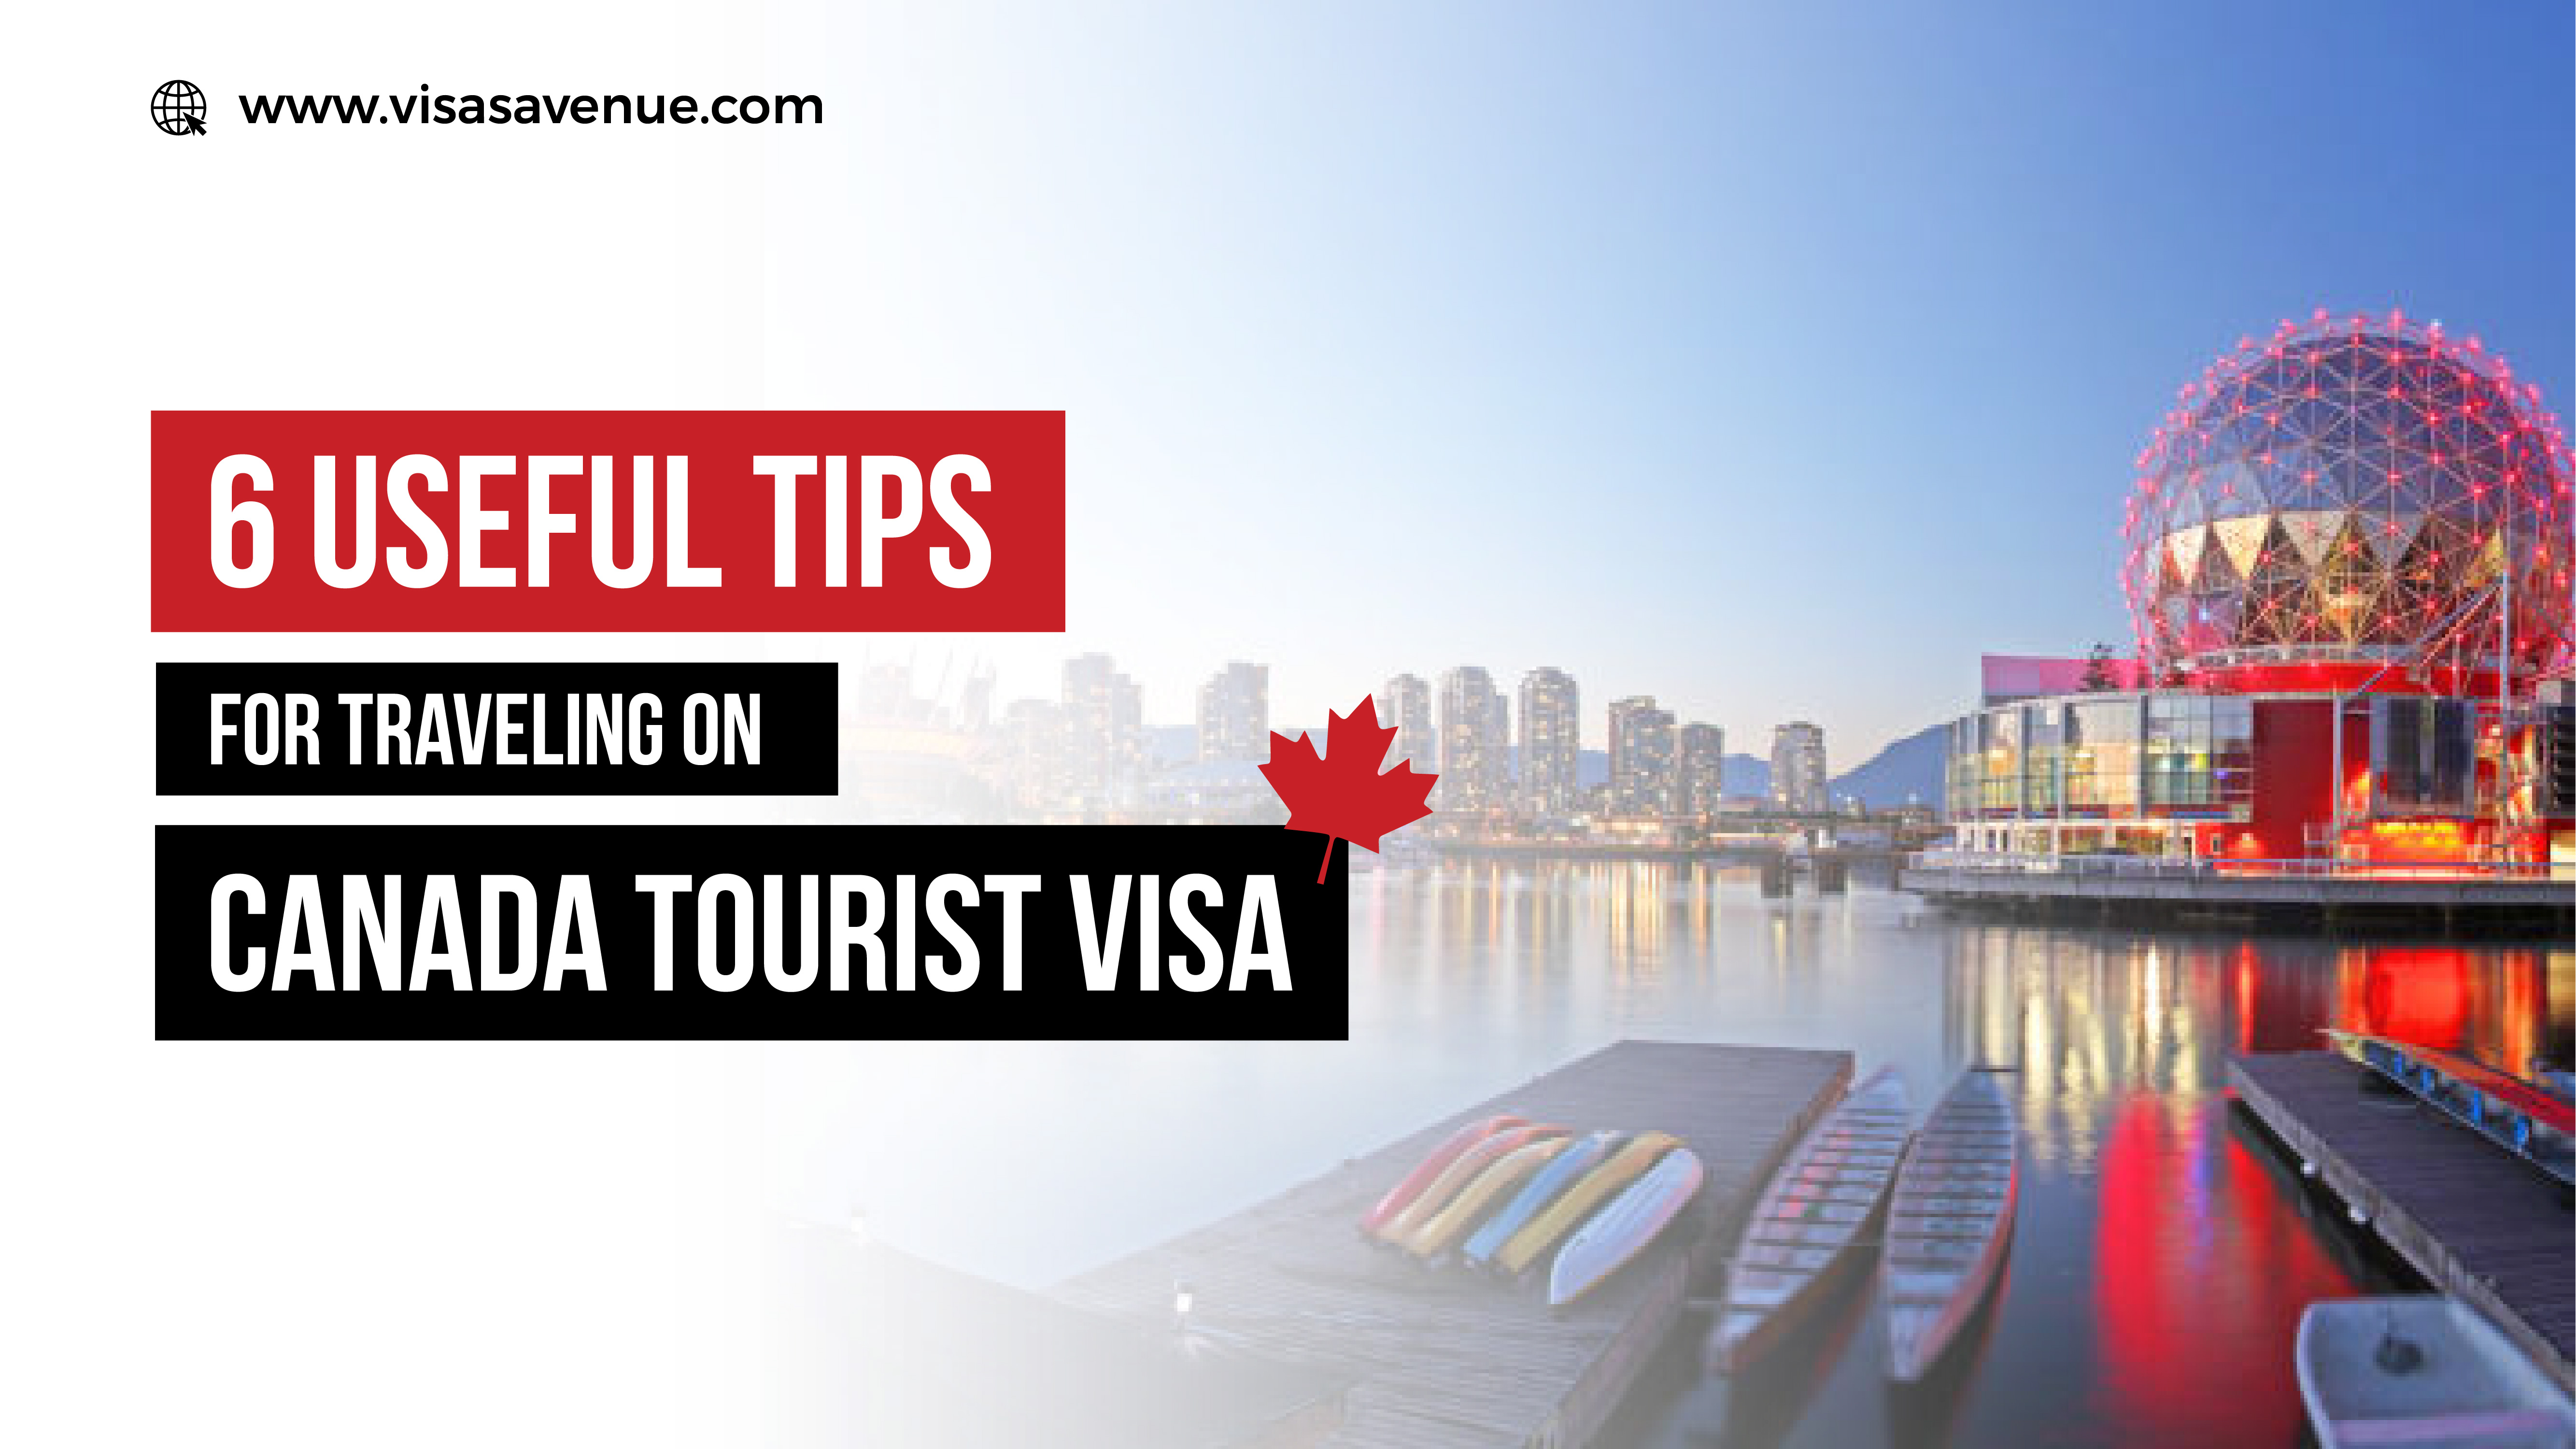 6 Useful Tips for Traveling on Canada Tourist Visa